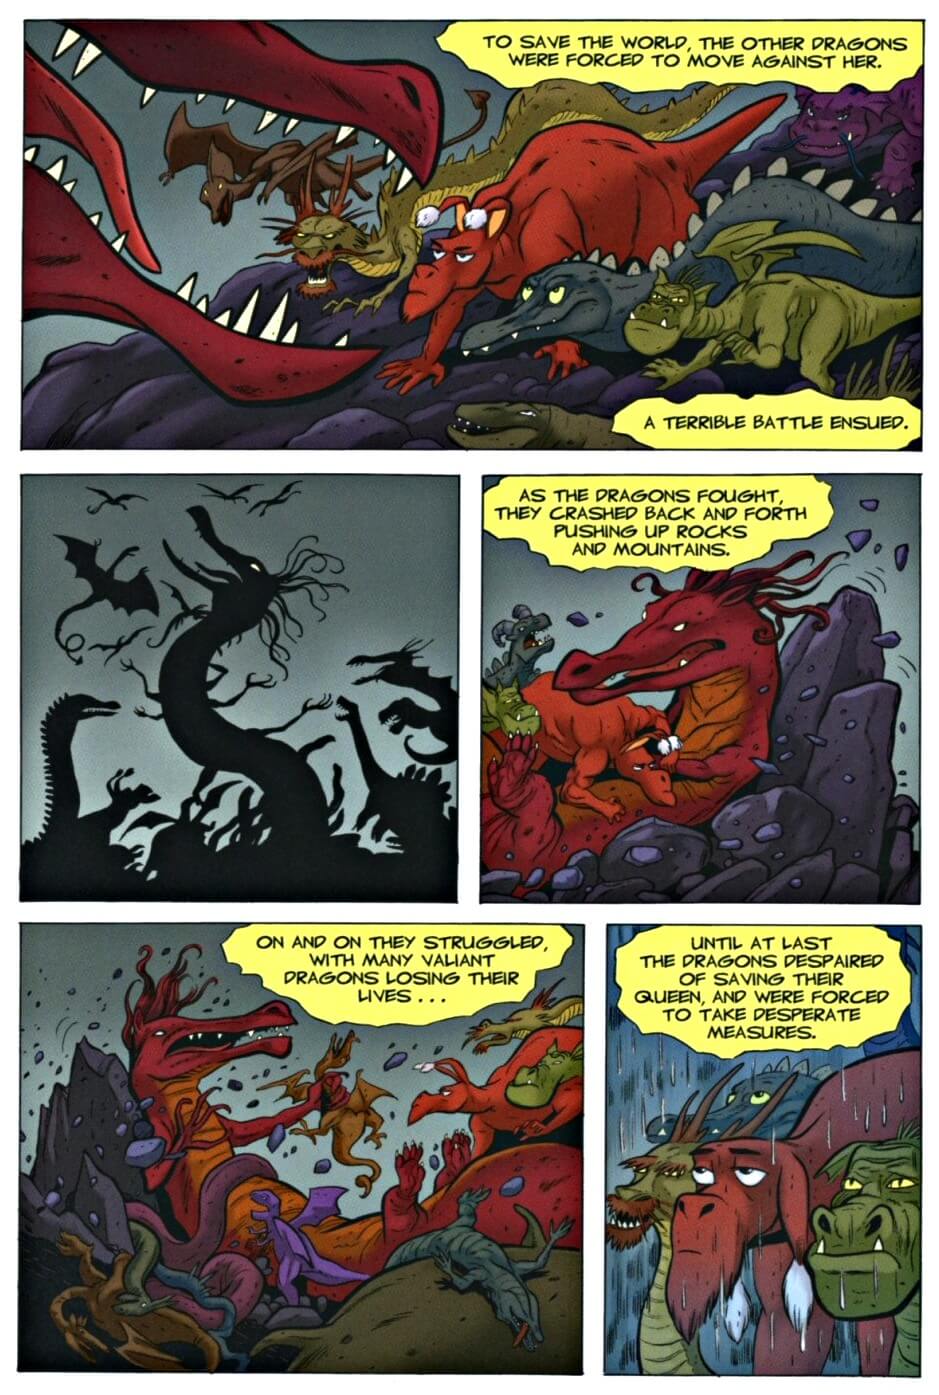 page 56 chapter 2 of bone 9 crown of horns graphic novel